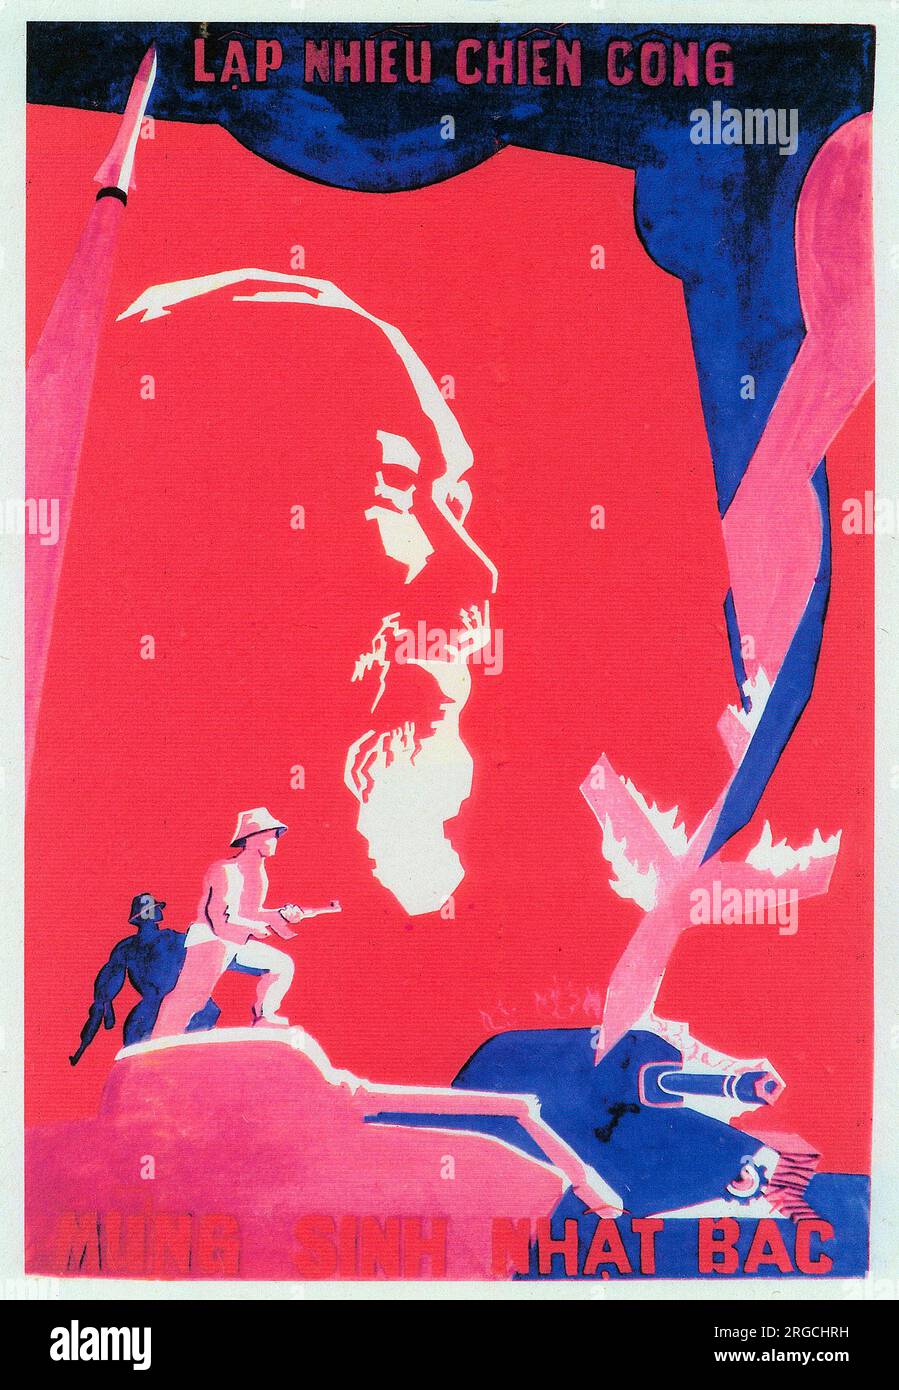 Vietnamese Patriotic Poster - the spectral visage of Ho Chi Minh watching on in pride as the Viet Cong forces destroy American tanks, shoot down aircraft and launch missiles at their enemy in celebration of his Birthday! 'Achieve Many Victories'! Stock Photo